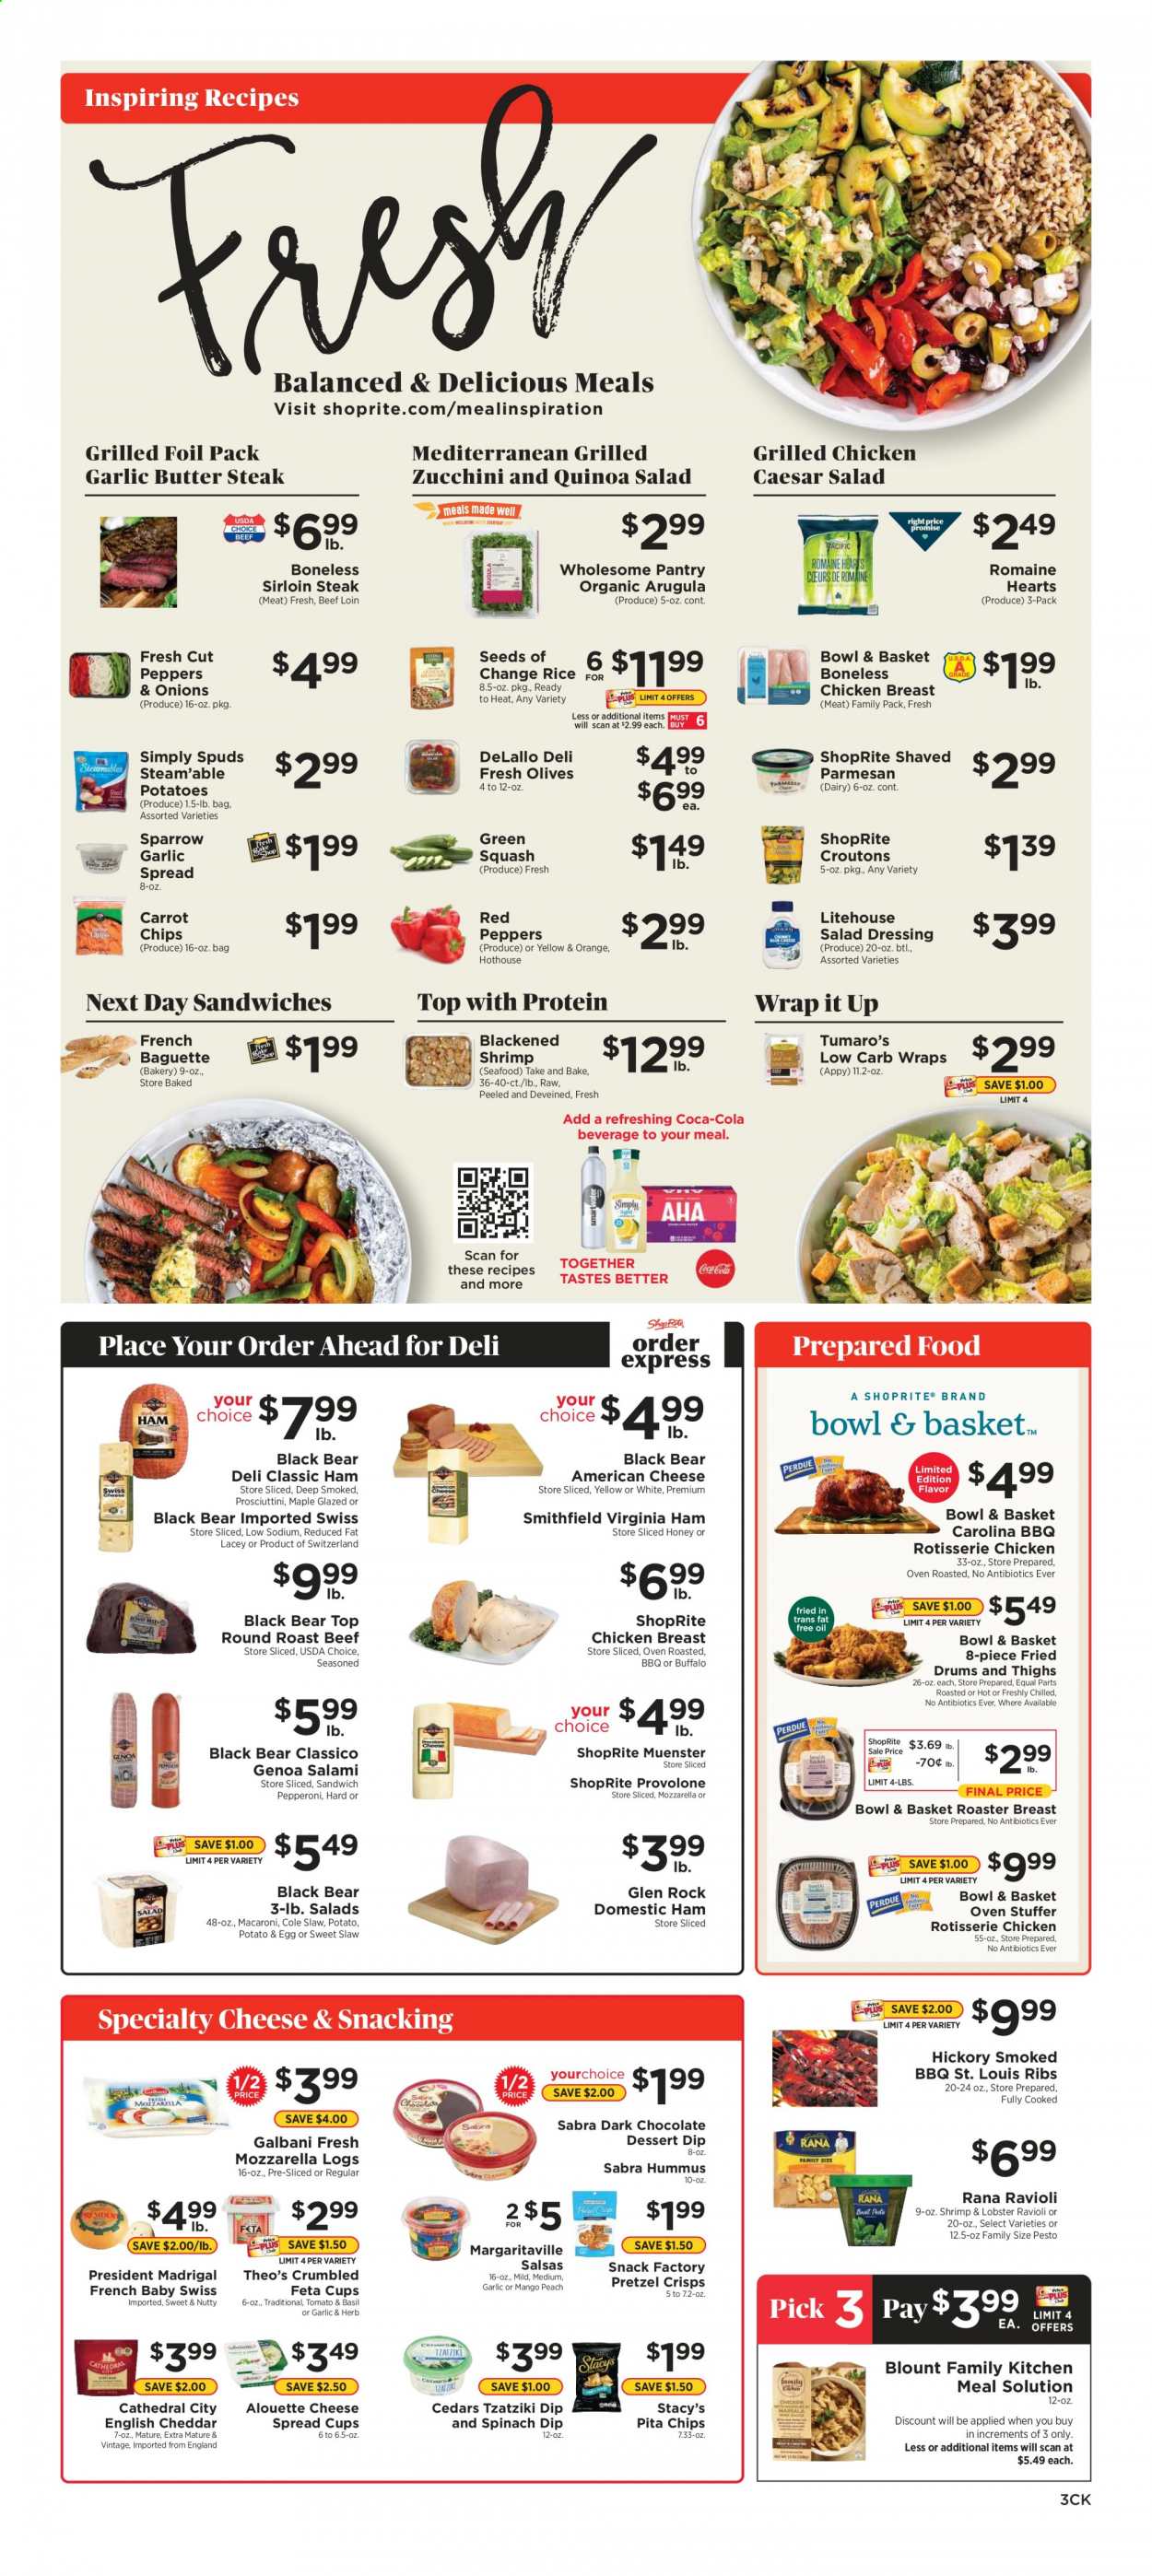 thumbnail - ShopRite Flyer - 06/20/2021 - 06/26/2021 - Sales products - baguette, Bowl & Basket, wraps, arugula, zucchini, potatoes, onion, peppers, red peppers, lobster, seafood, shrimps, ravioli, chicken roast, sandwich, macaroni, Giovanni Rana, Rana, salami, ham, virginia ham, pepperoni, tzatziki, hummus, cheese spread, american cheese, mozzarella, parmesan, Münster cheese, Président, feta, Galbani, Provolone, eggs, butter, dip, spinach dip, chocolate, snack, dark chocolate, chips, pretzel crisps, pita chips, croutons, olives, quinoa, rice, salad dressing, pesto, dressing, Classico, Coca-Cola, chicken breasts, beef meat, beef sirloin, steak, round roast, roast beef, sirloin steak, cup. Page 3.